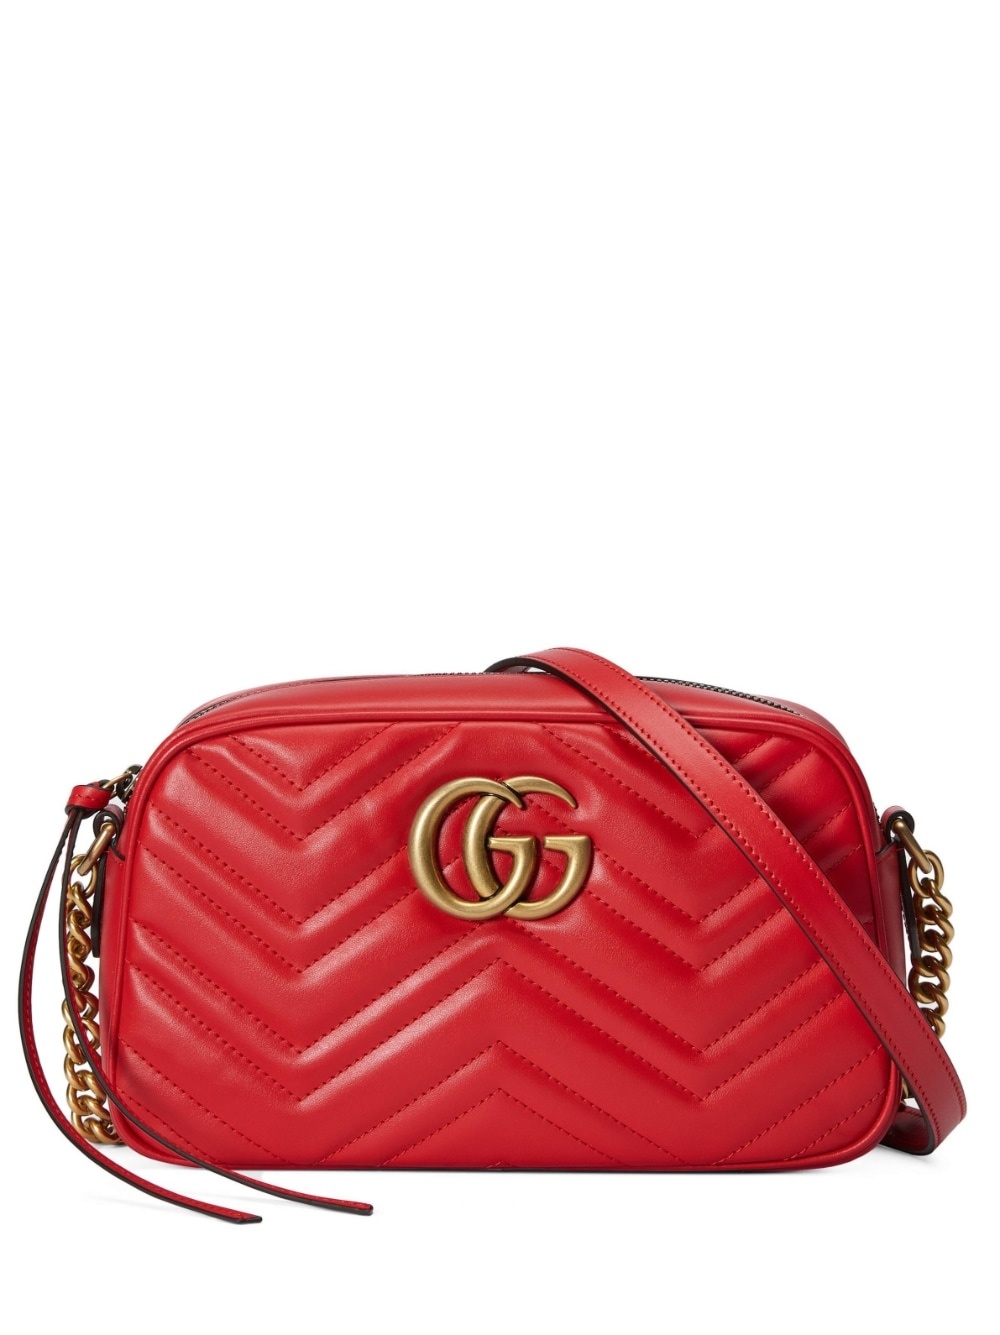 Gg marmont small leather shoulder bag - 1